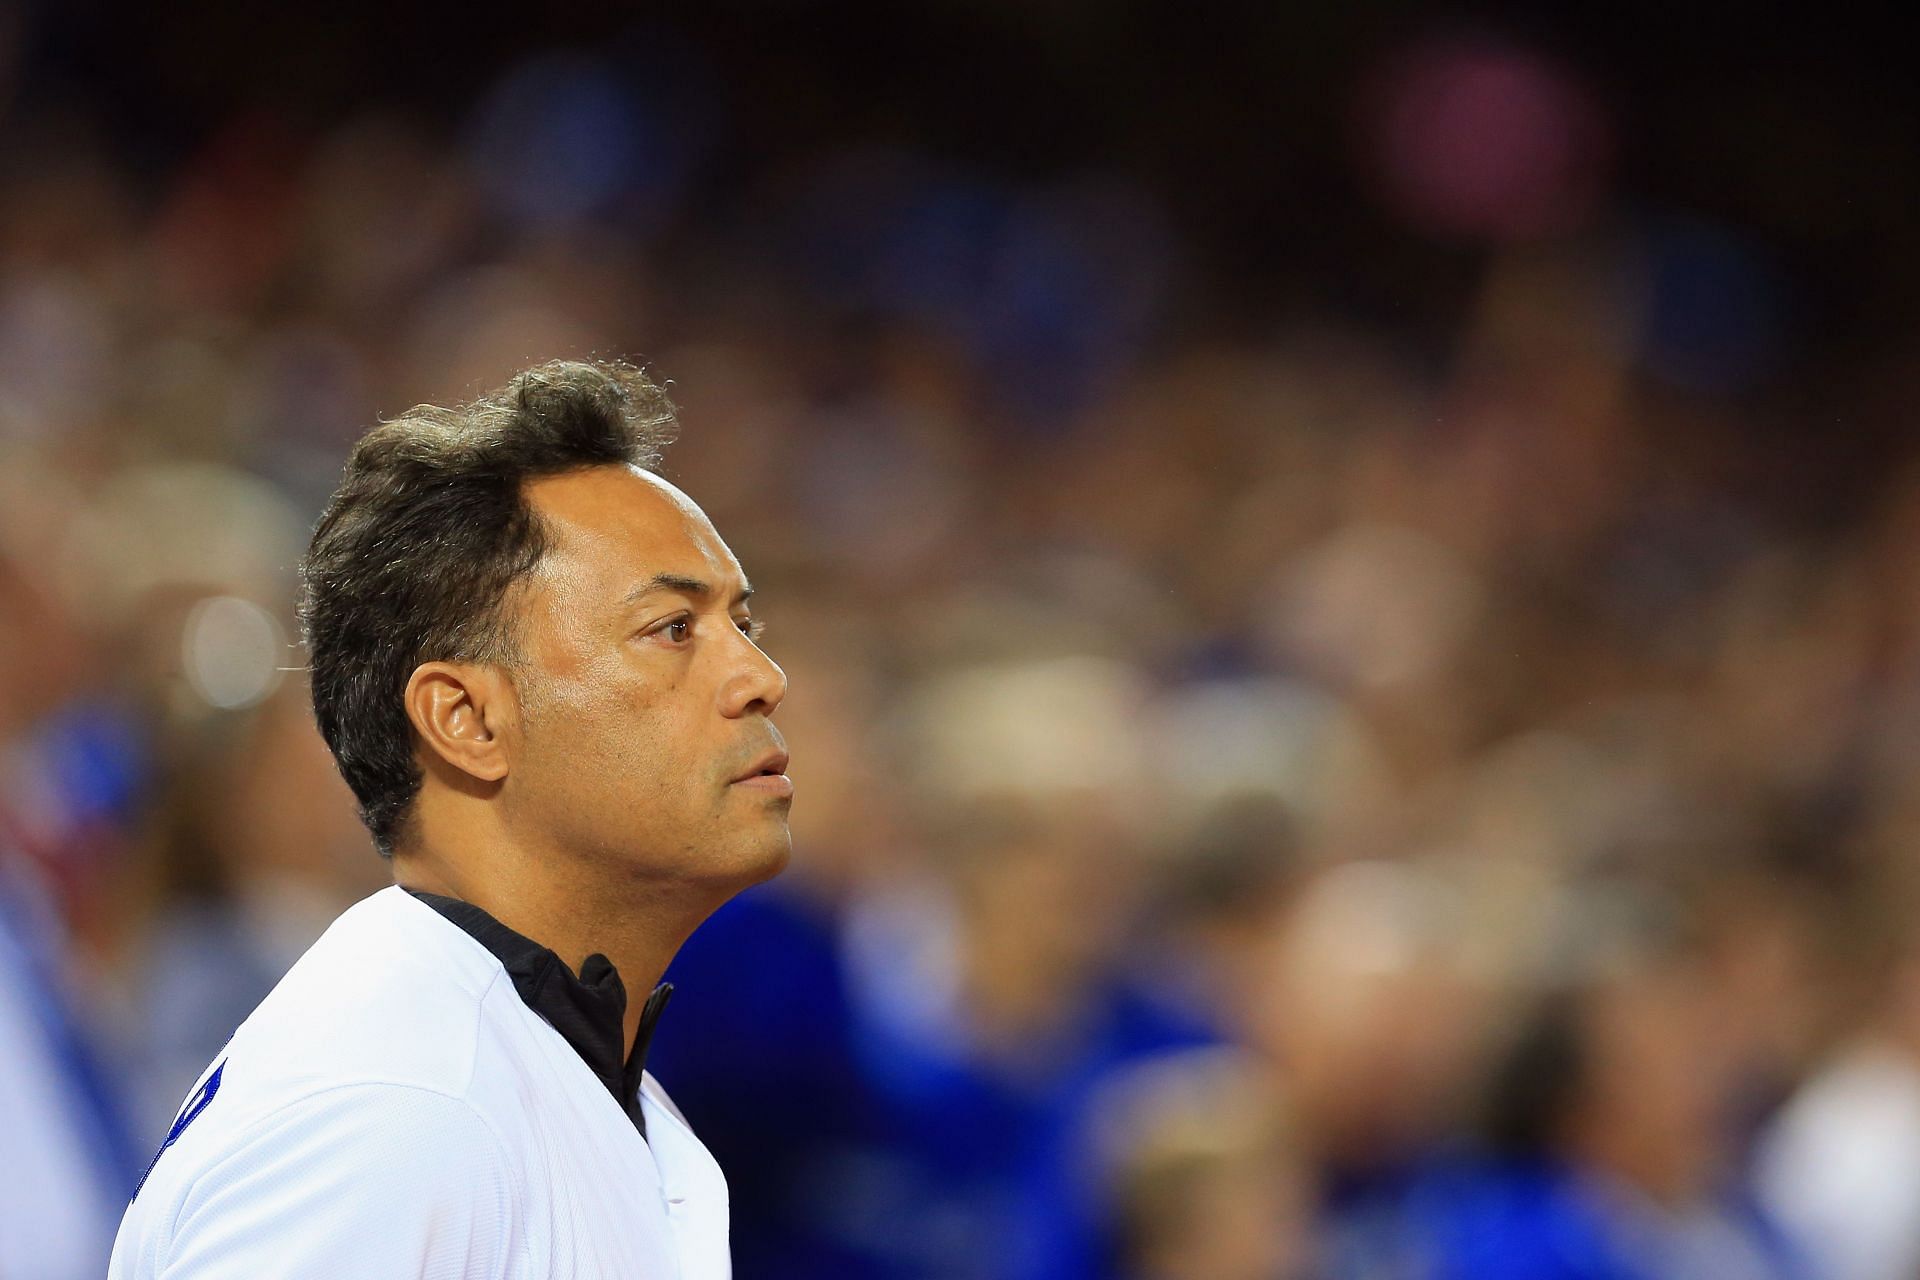 Blue Jays: The Alomar/Carter Trade, 30 Years Later